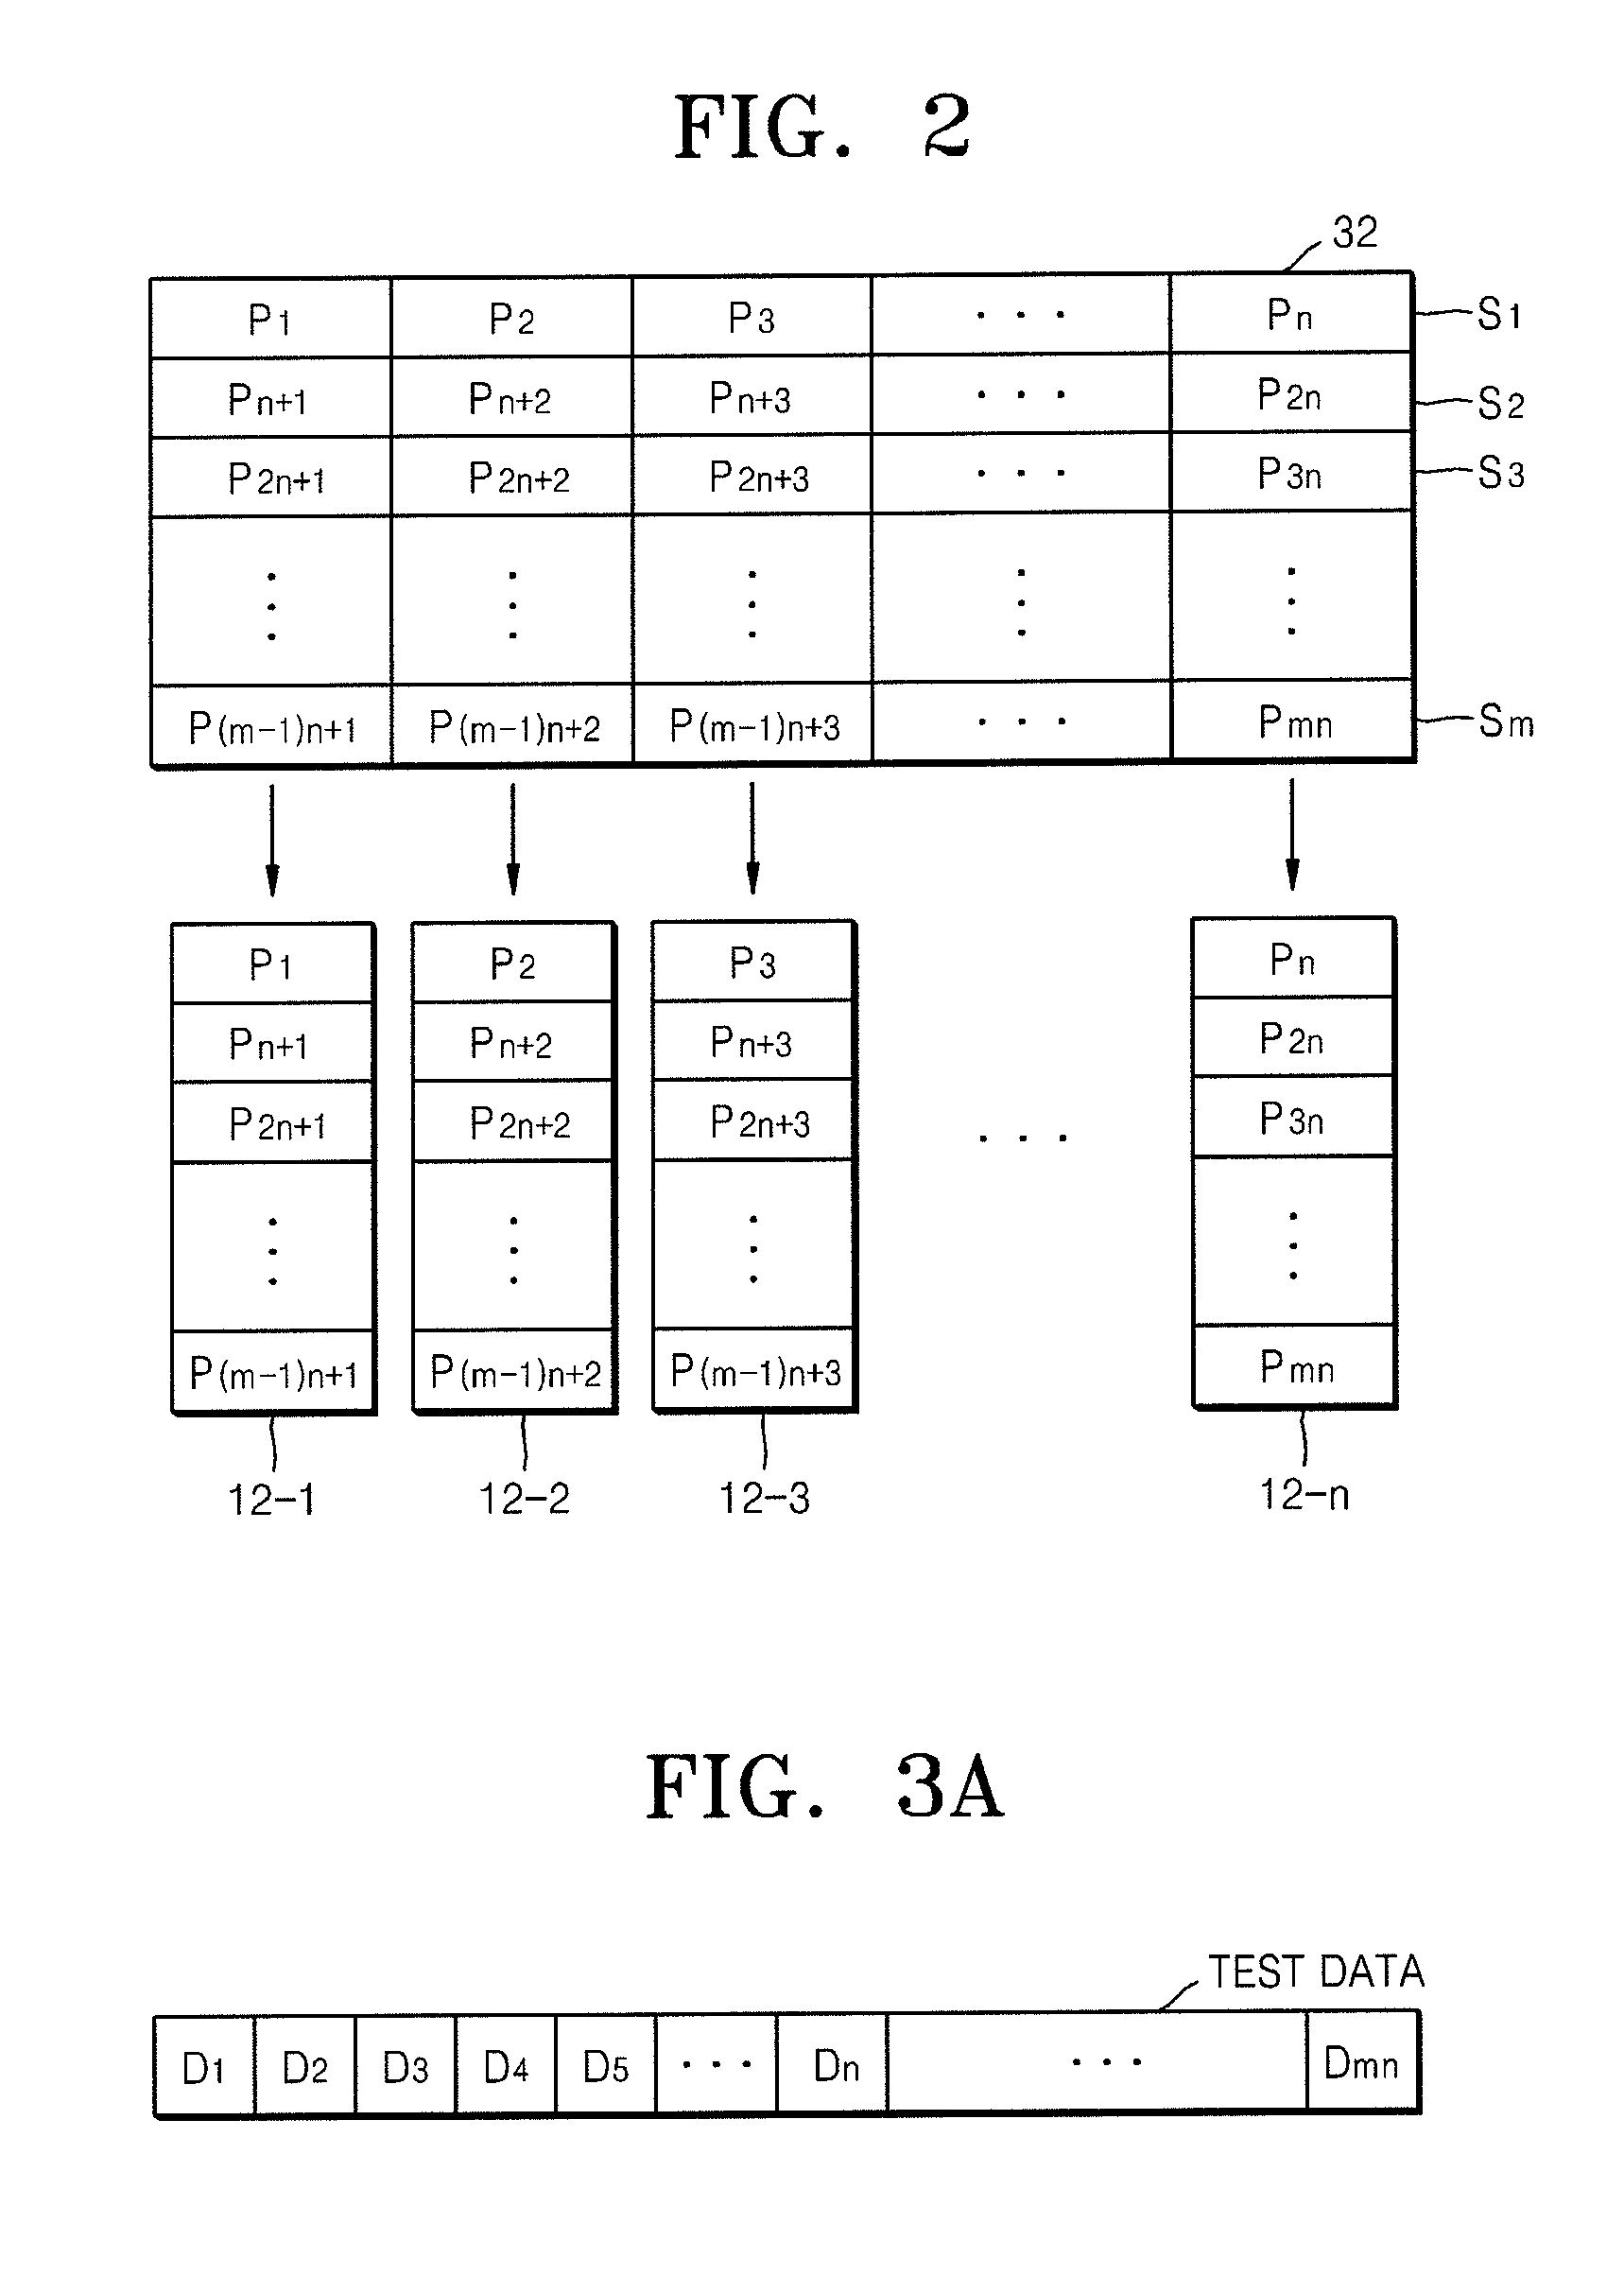 Method of testing data storage devices and a gender therefor